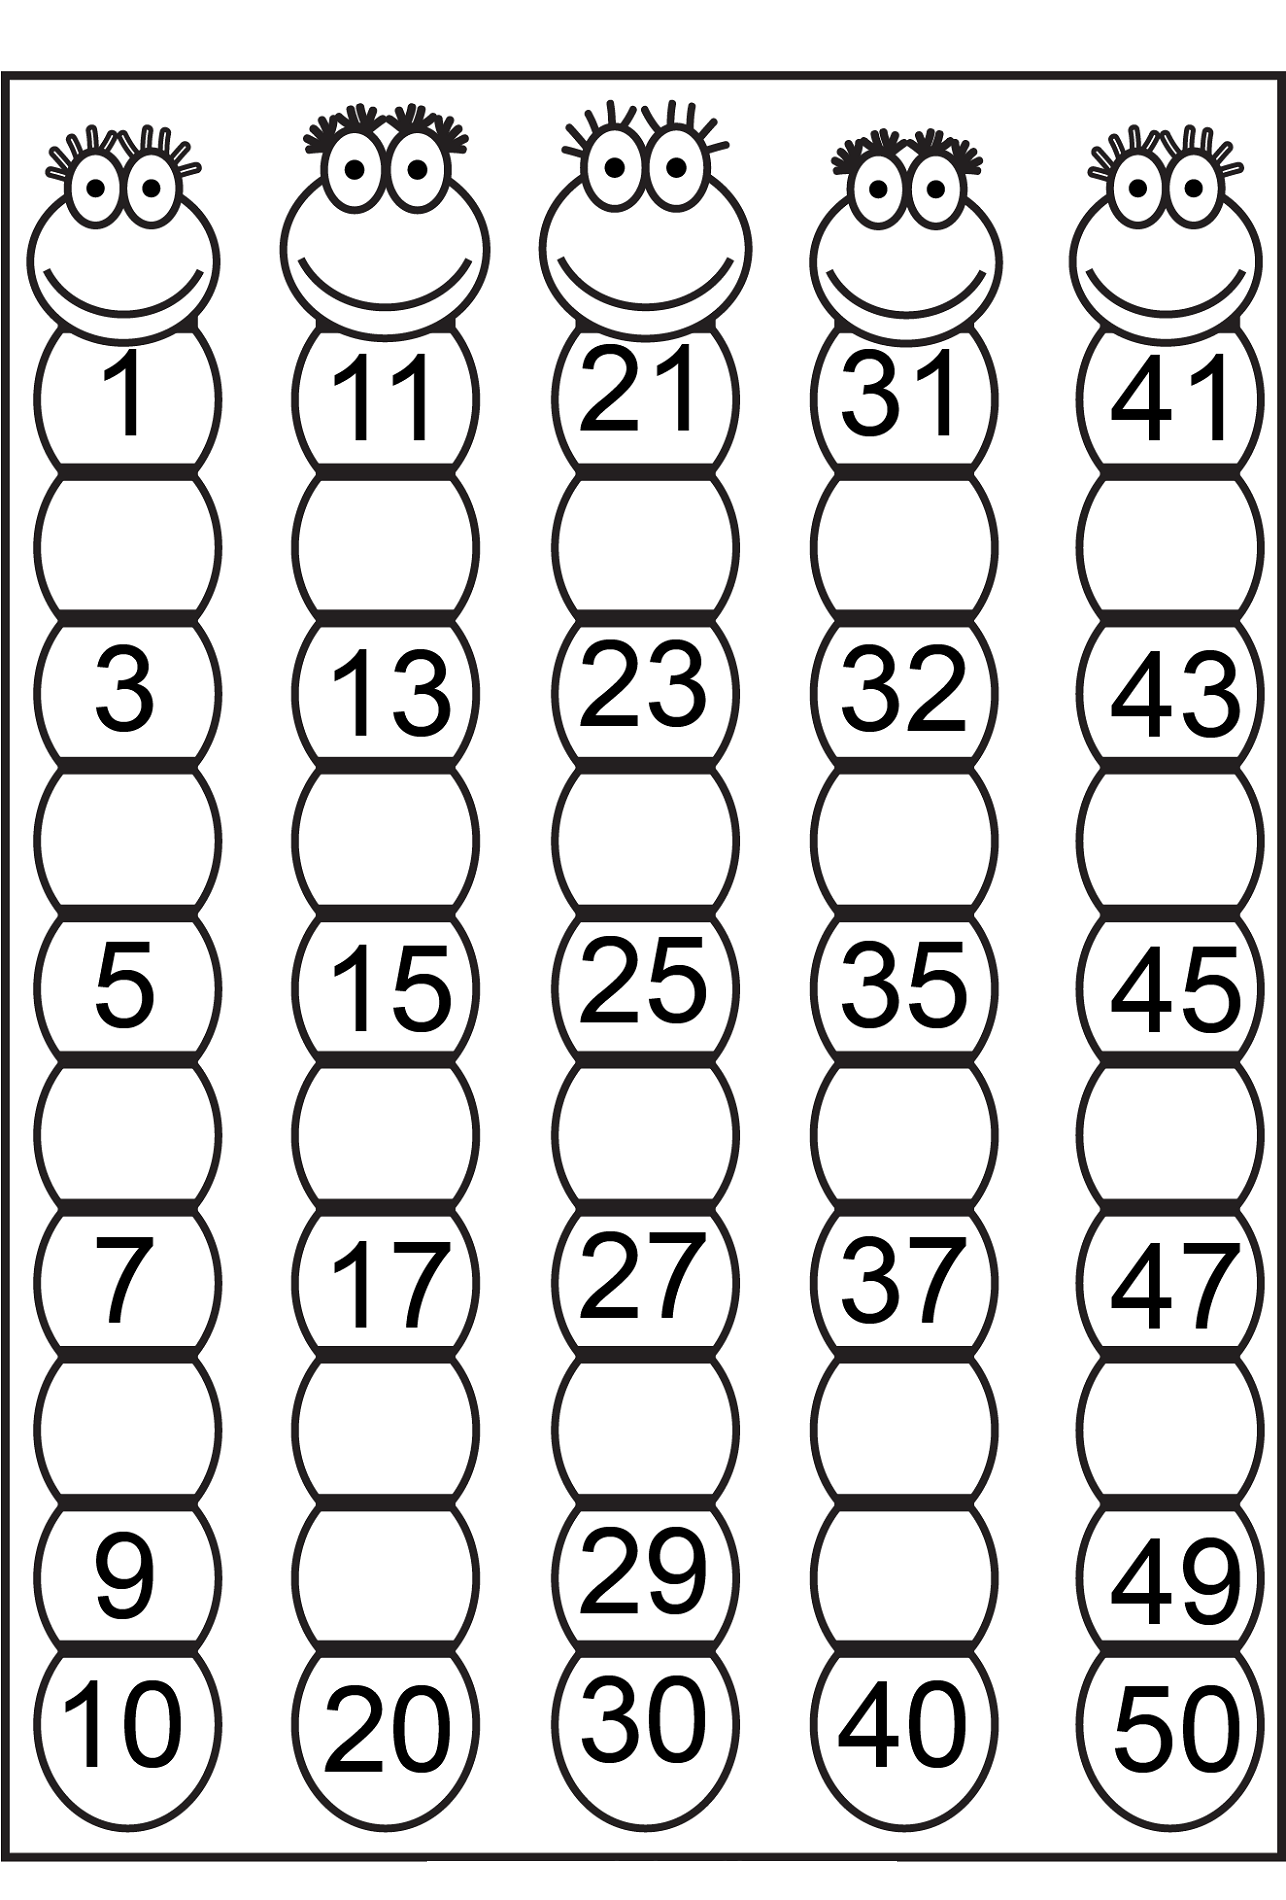 1-50 number chart for school